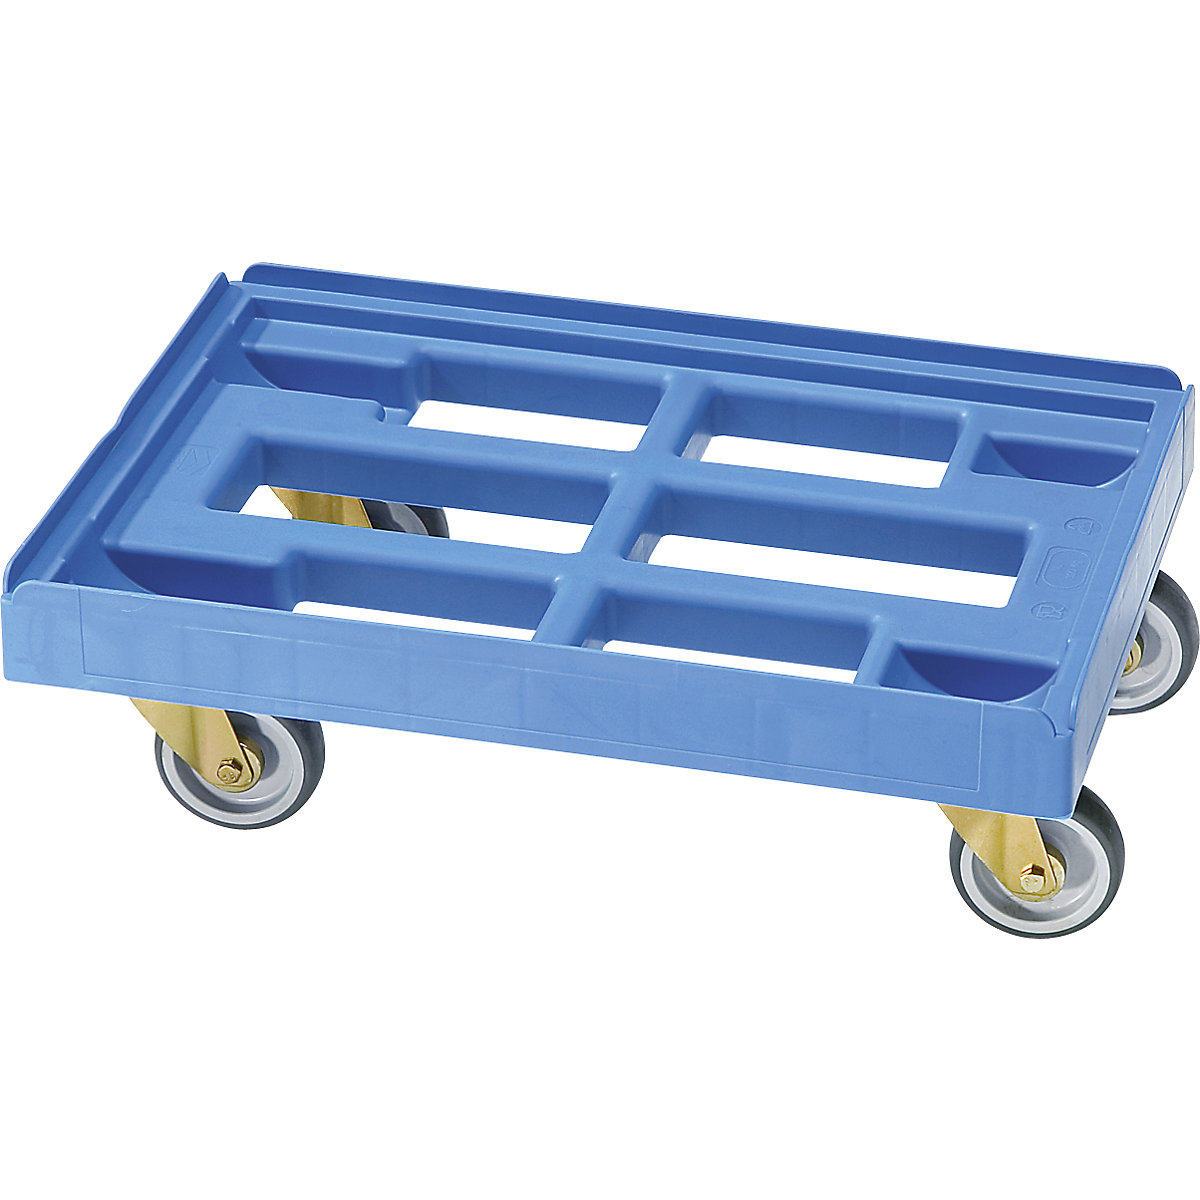 Transport dolly, LxW 610 x 410 mm, made of HDPE, light blue, 5+ items-3